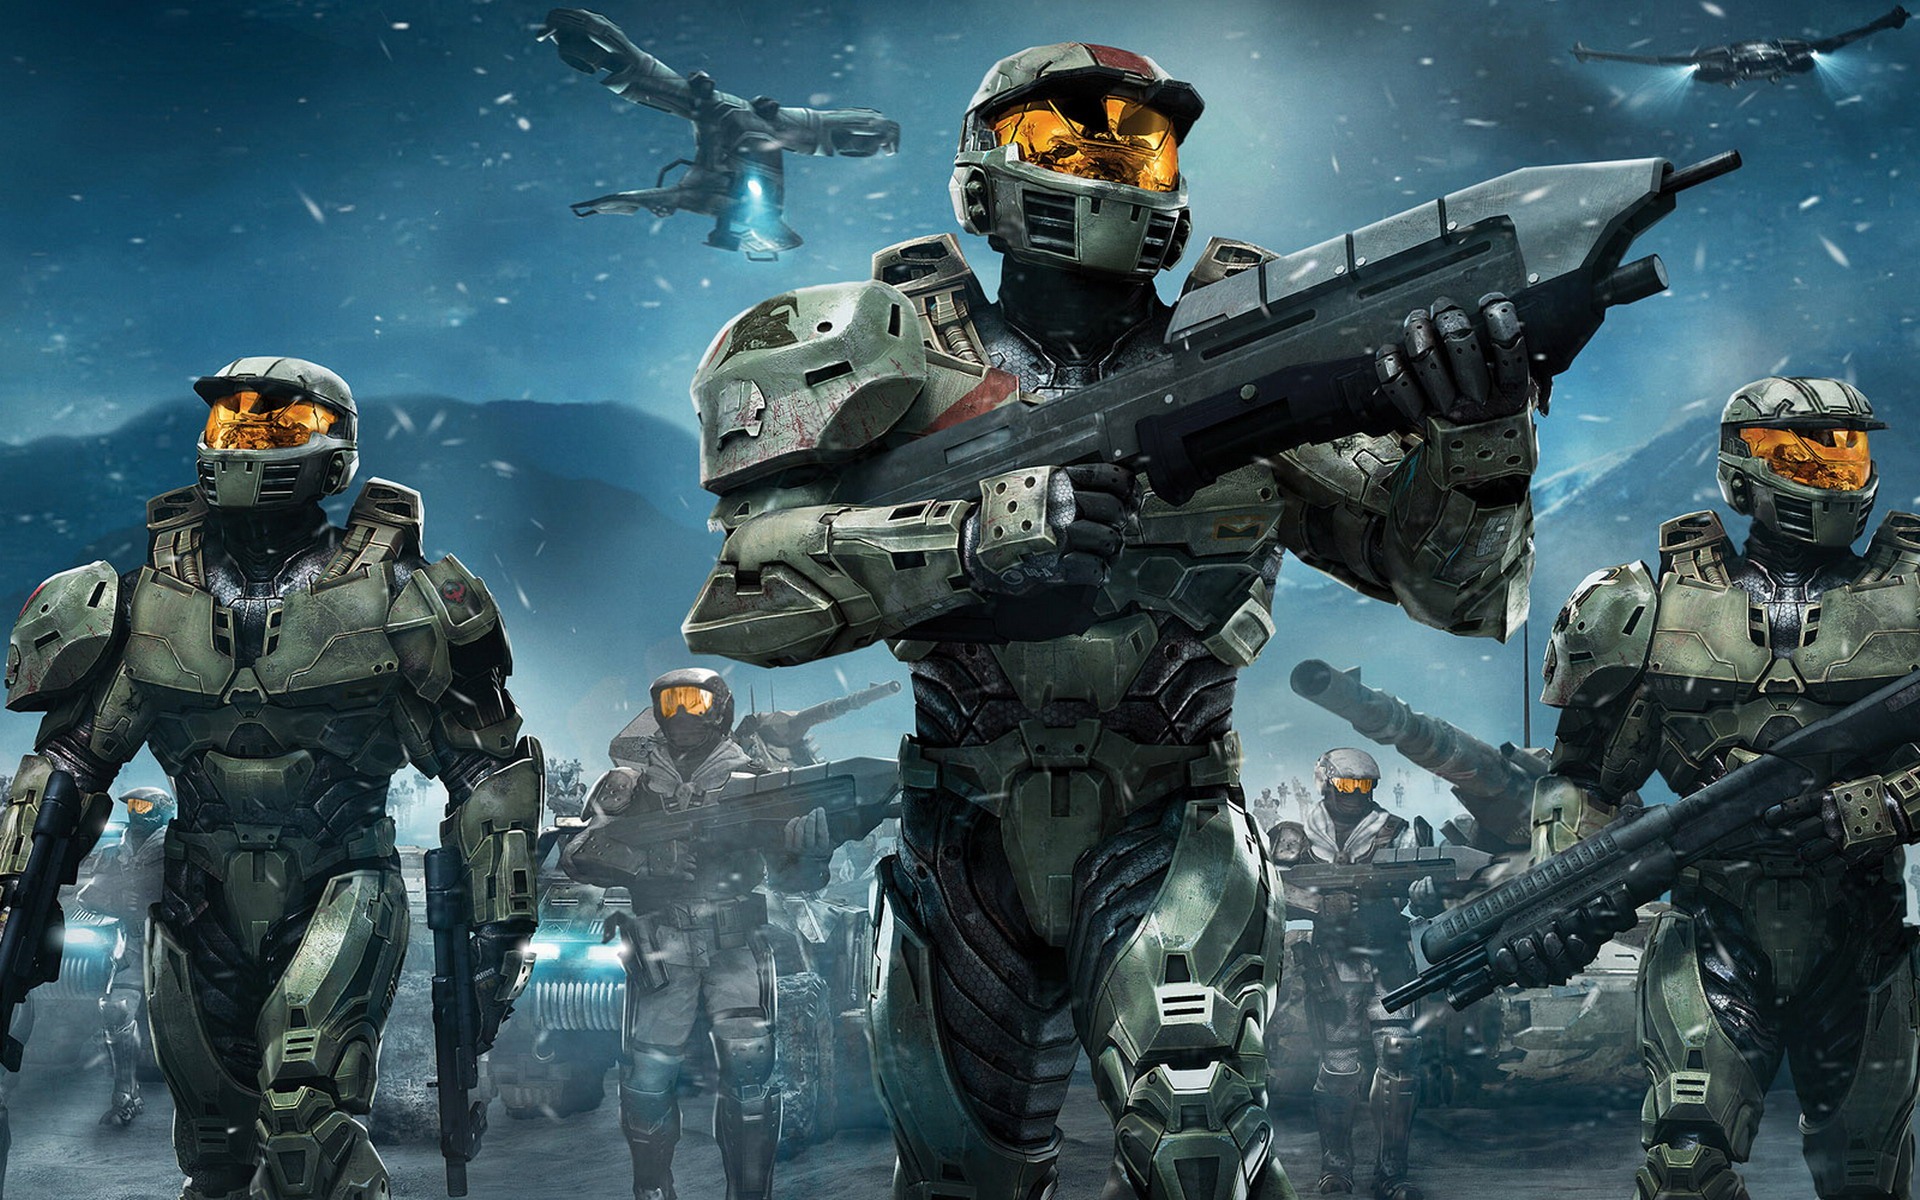 Halo game HD wallpapers #25 - 1920x1200